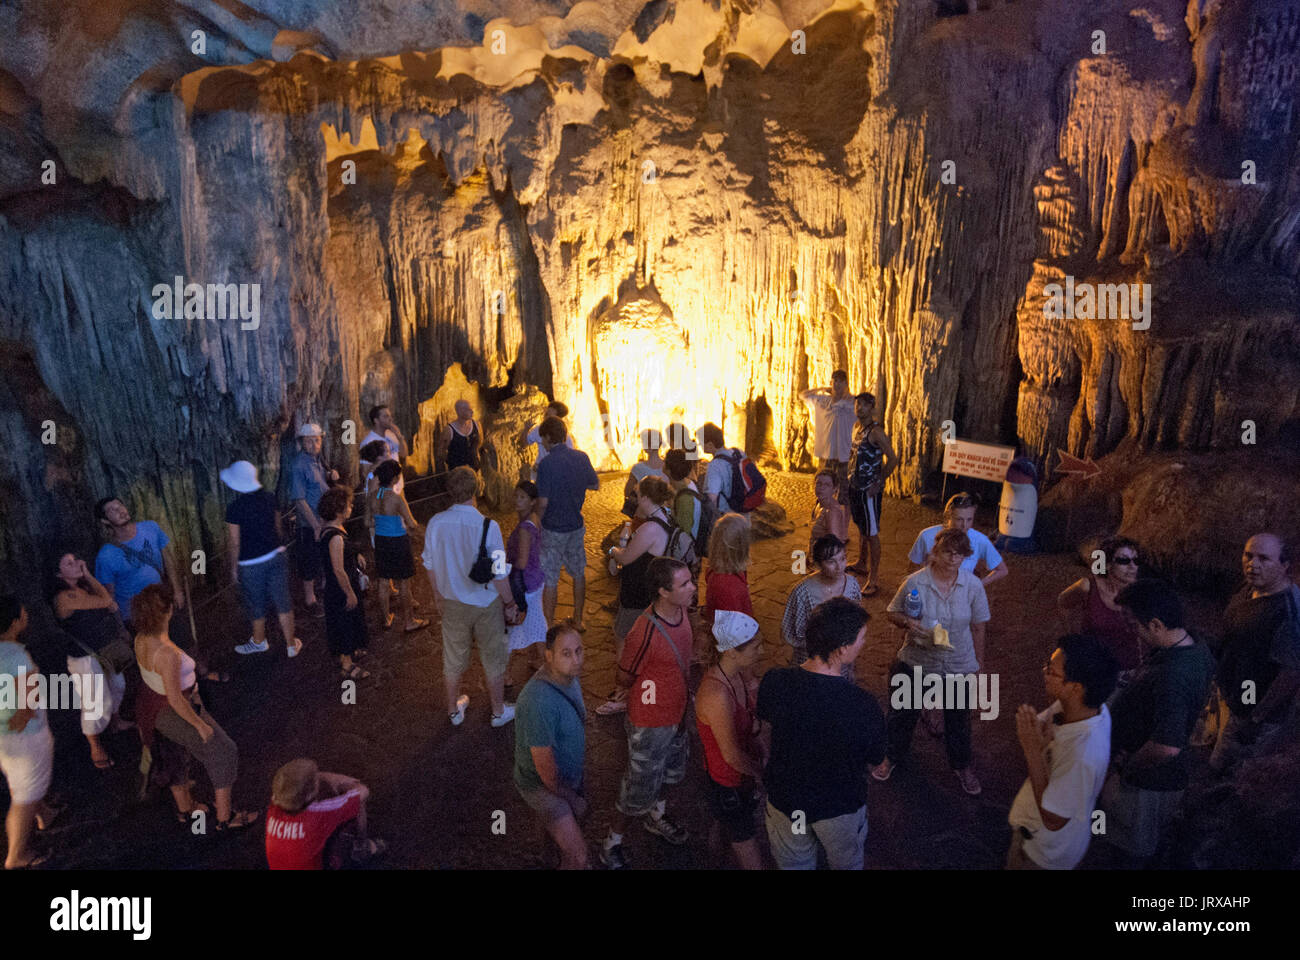 Hang Sung Sot, Cave of Surprises, stalactite cave in Halong Bay, Vietnam, Southeast Asia. Hang Sung Sot or Surprise Grotto - Bo Hon Island - Halong Ba Stock Photo